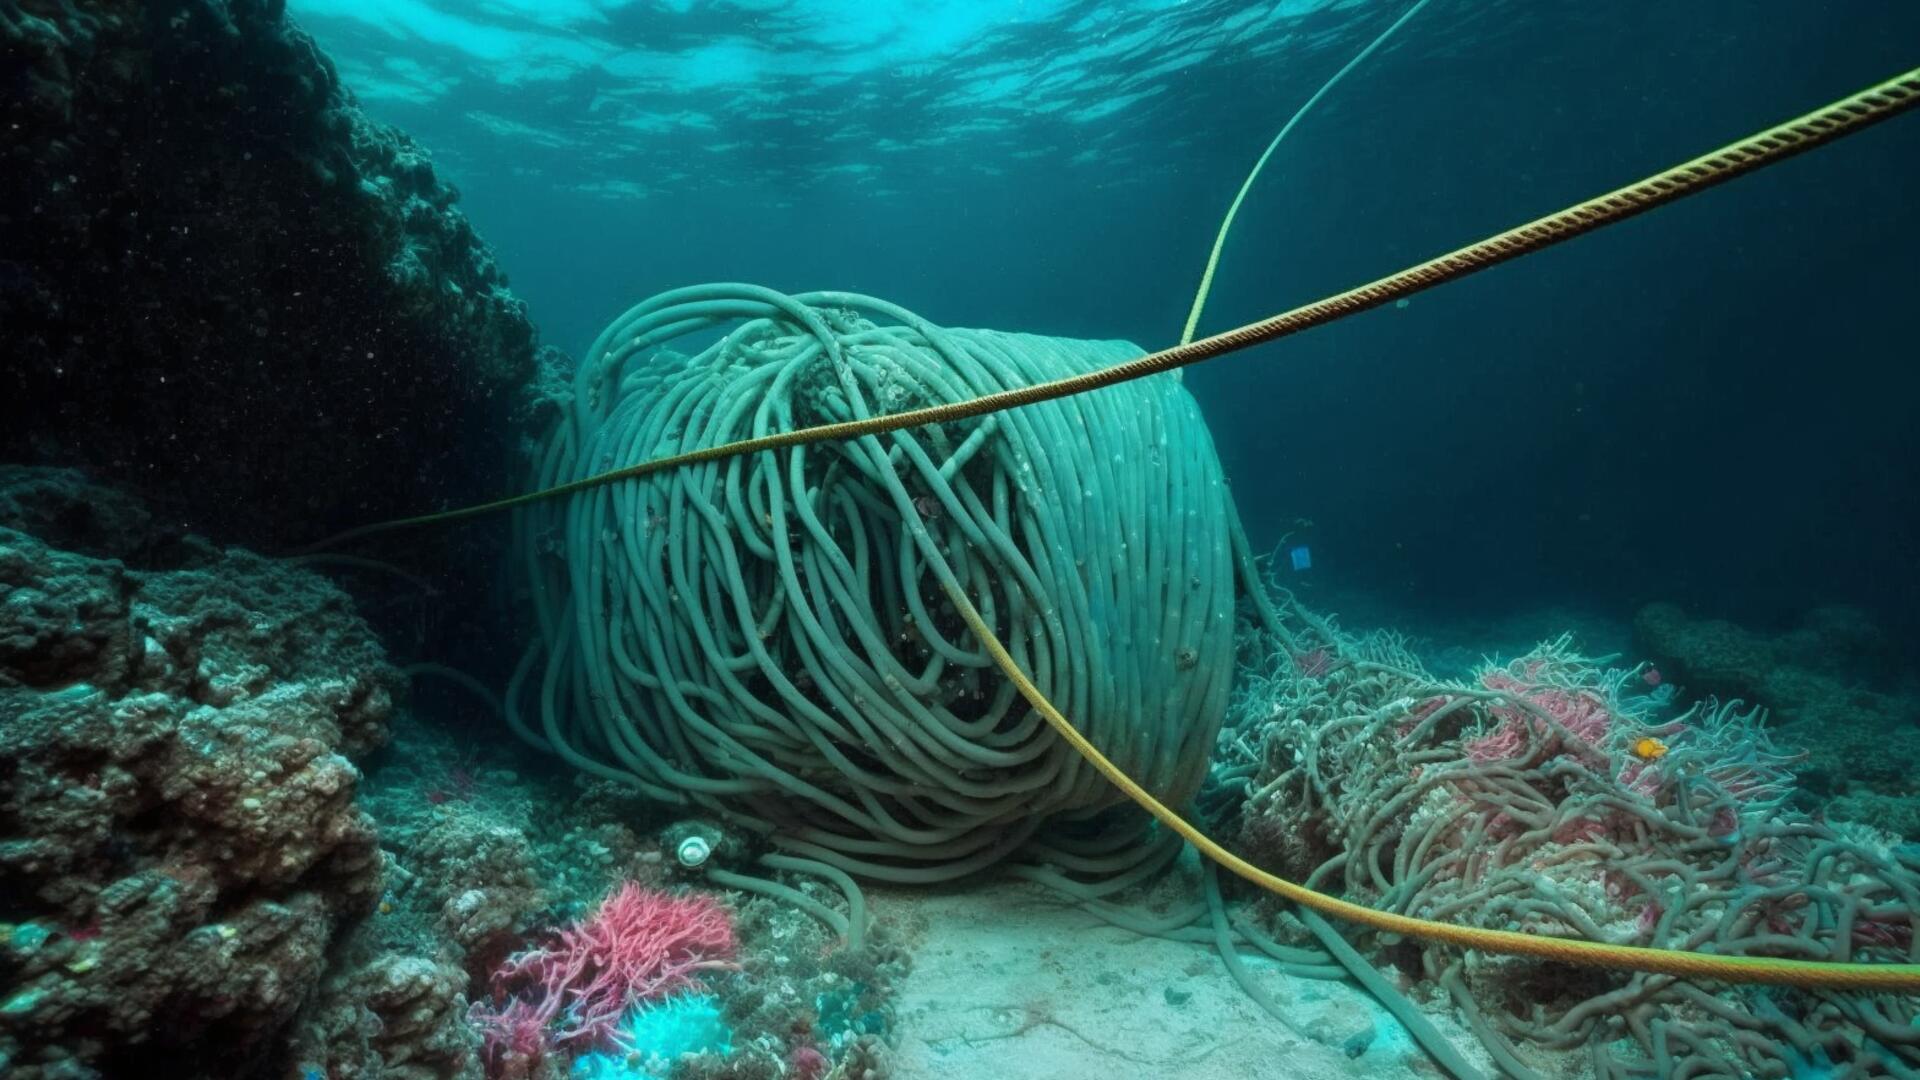 The 5th undersea fiber optic cable has a problem